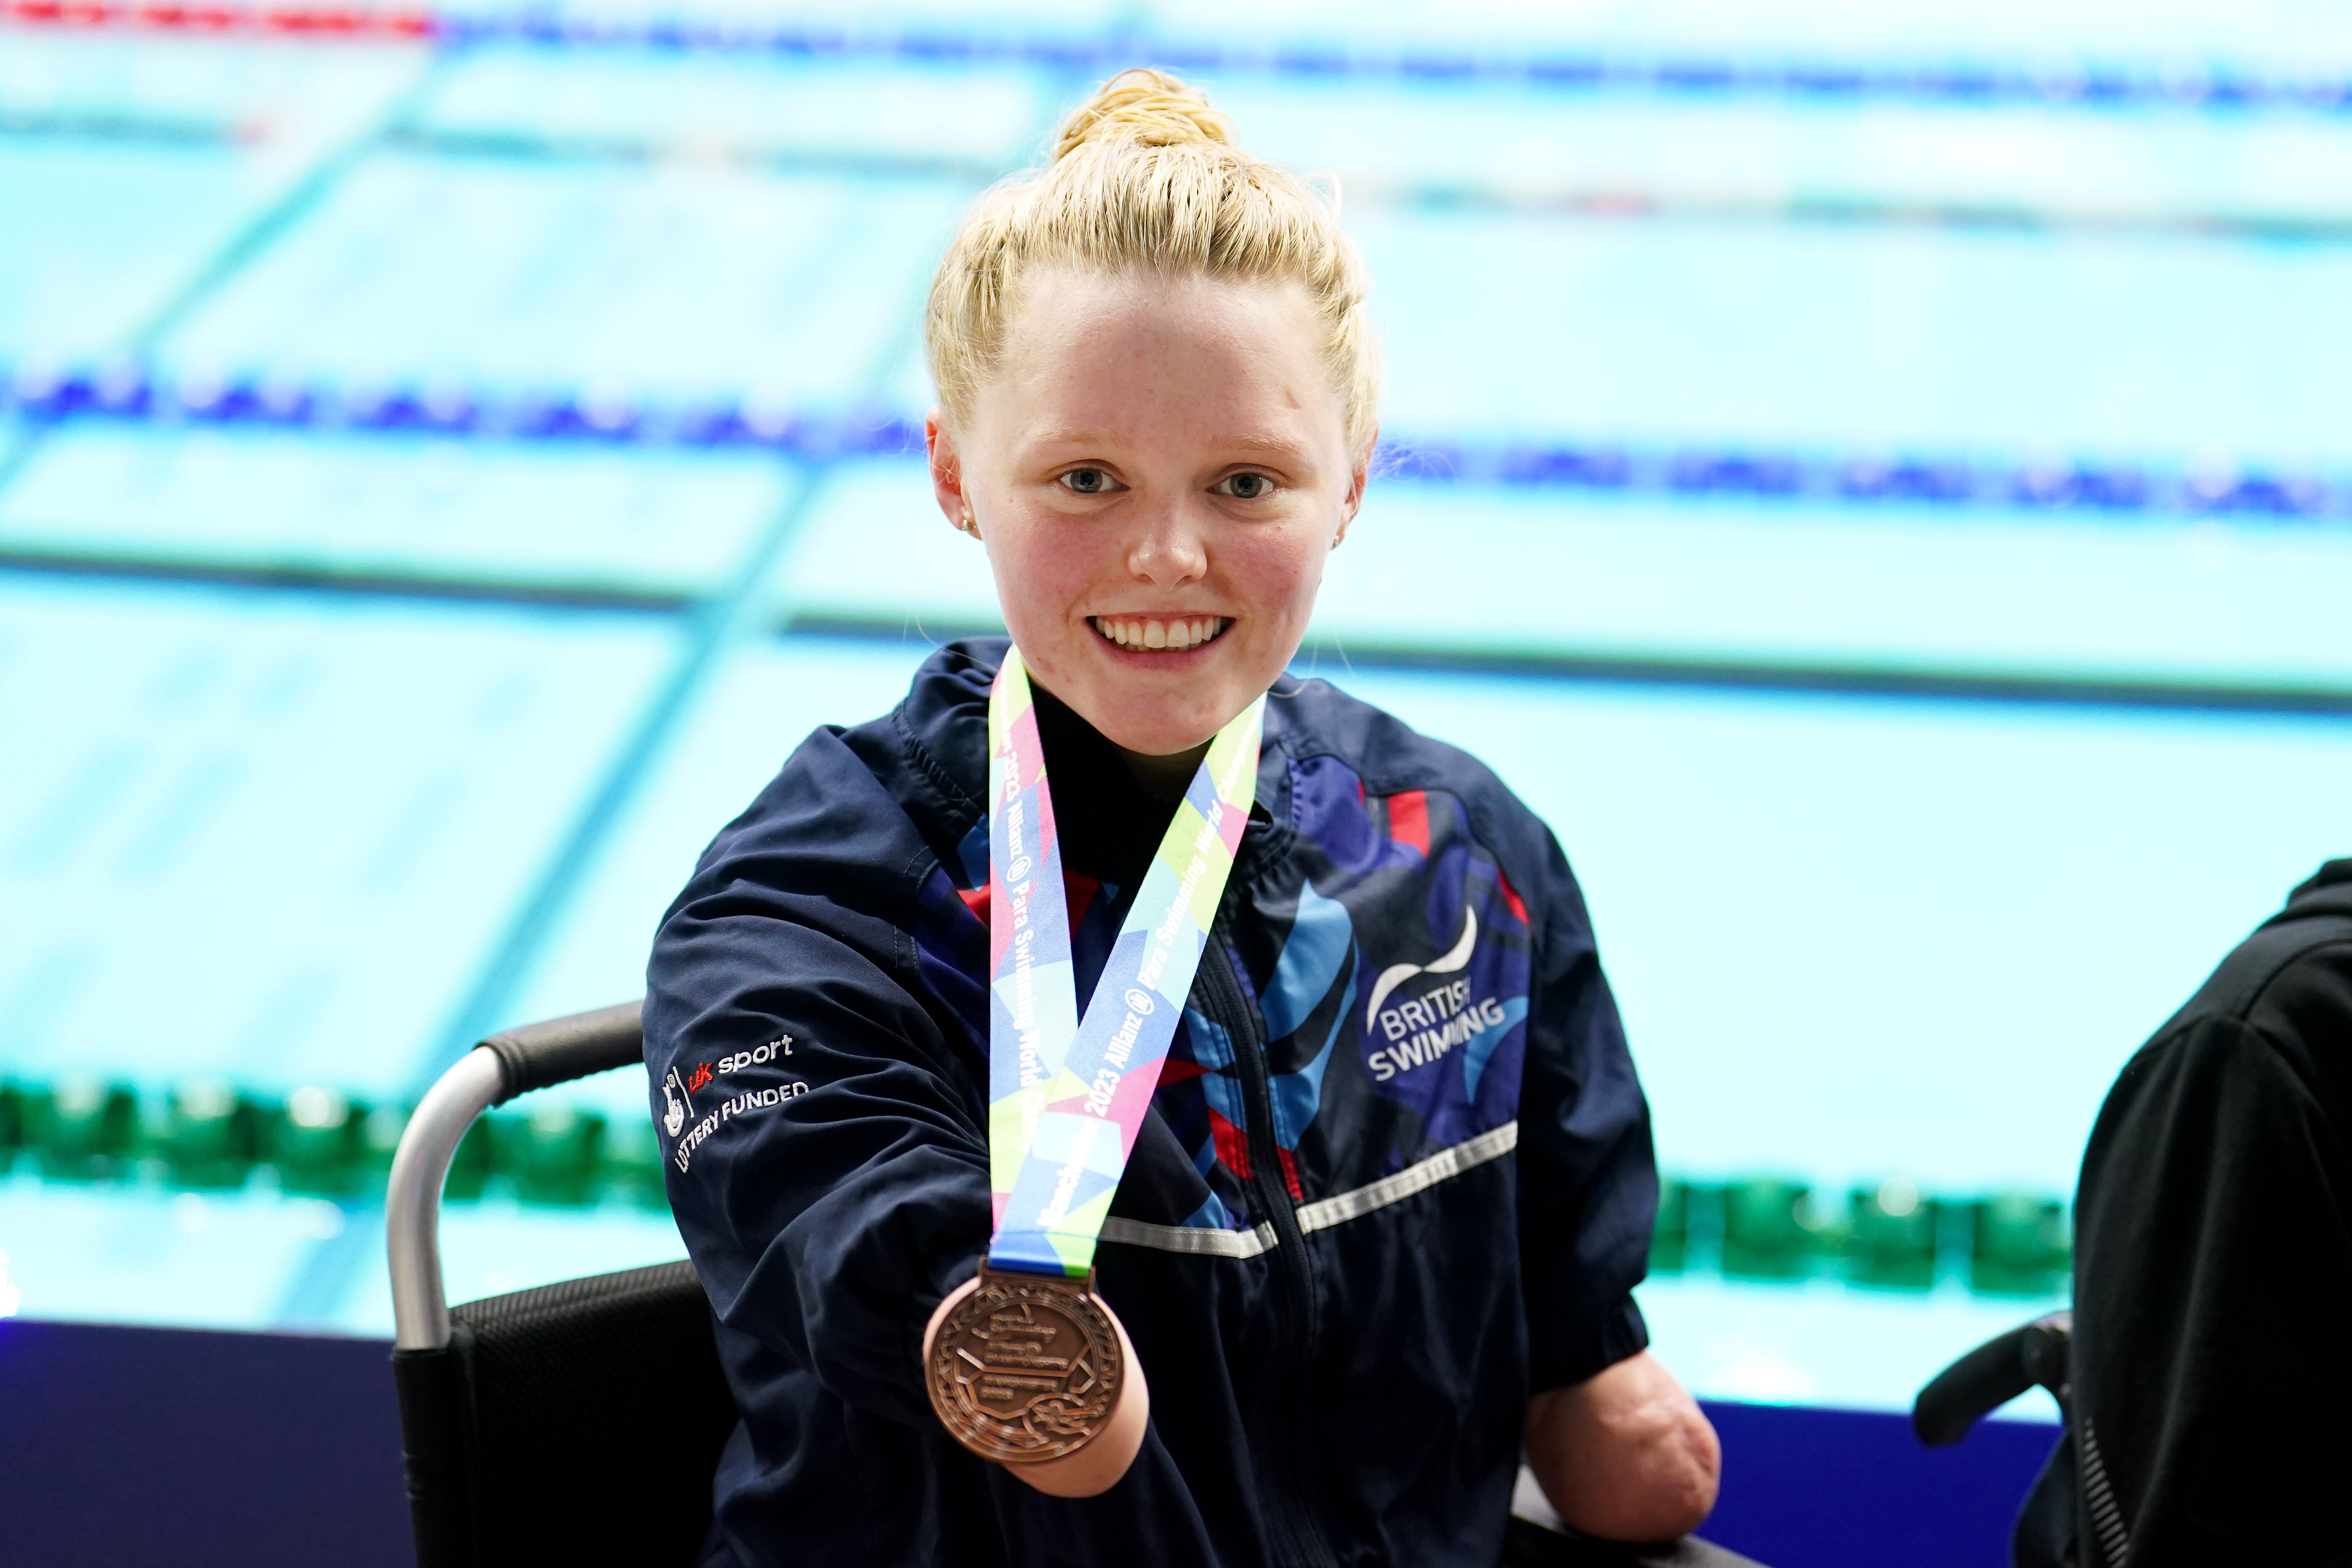 Ellie Challis is a Paralympic swimmer who holds one world record and multiple British bests